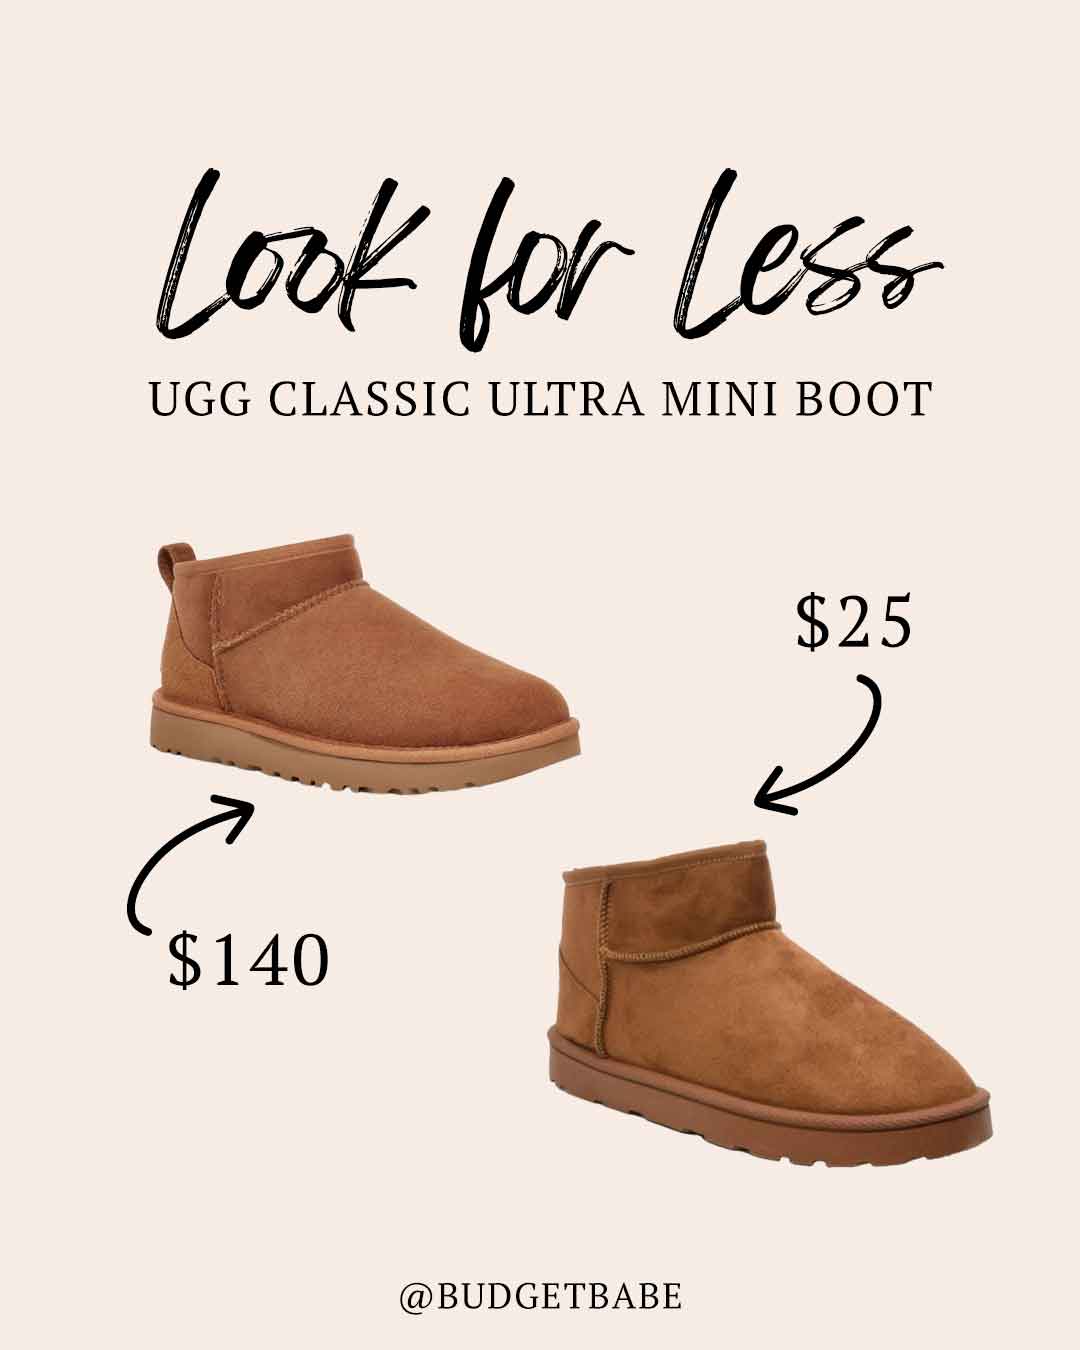 Ugg mini boot look for less at Walmart